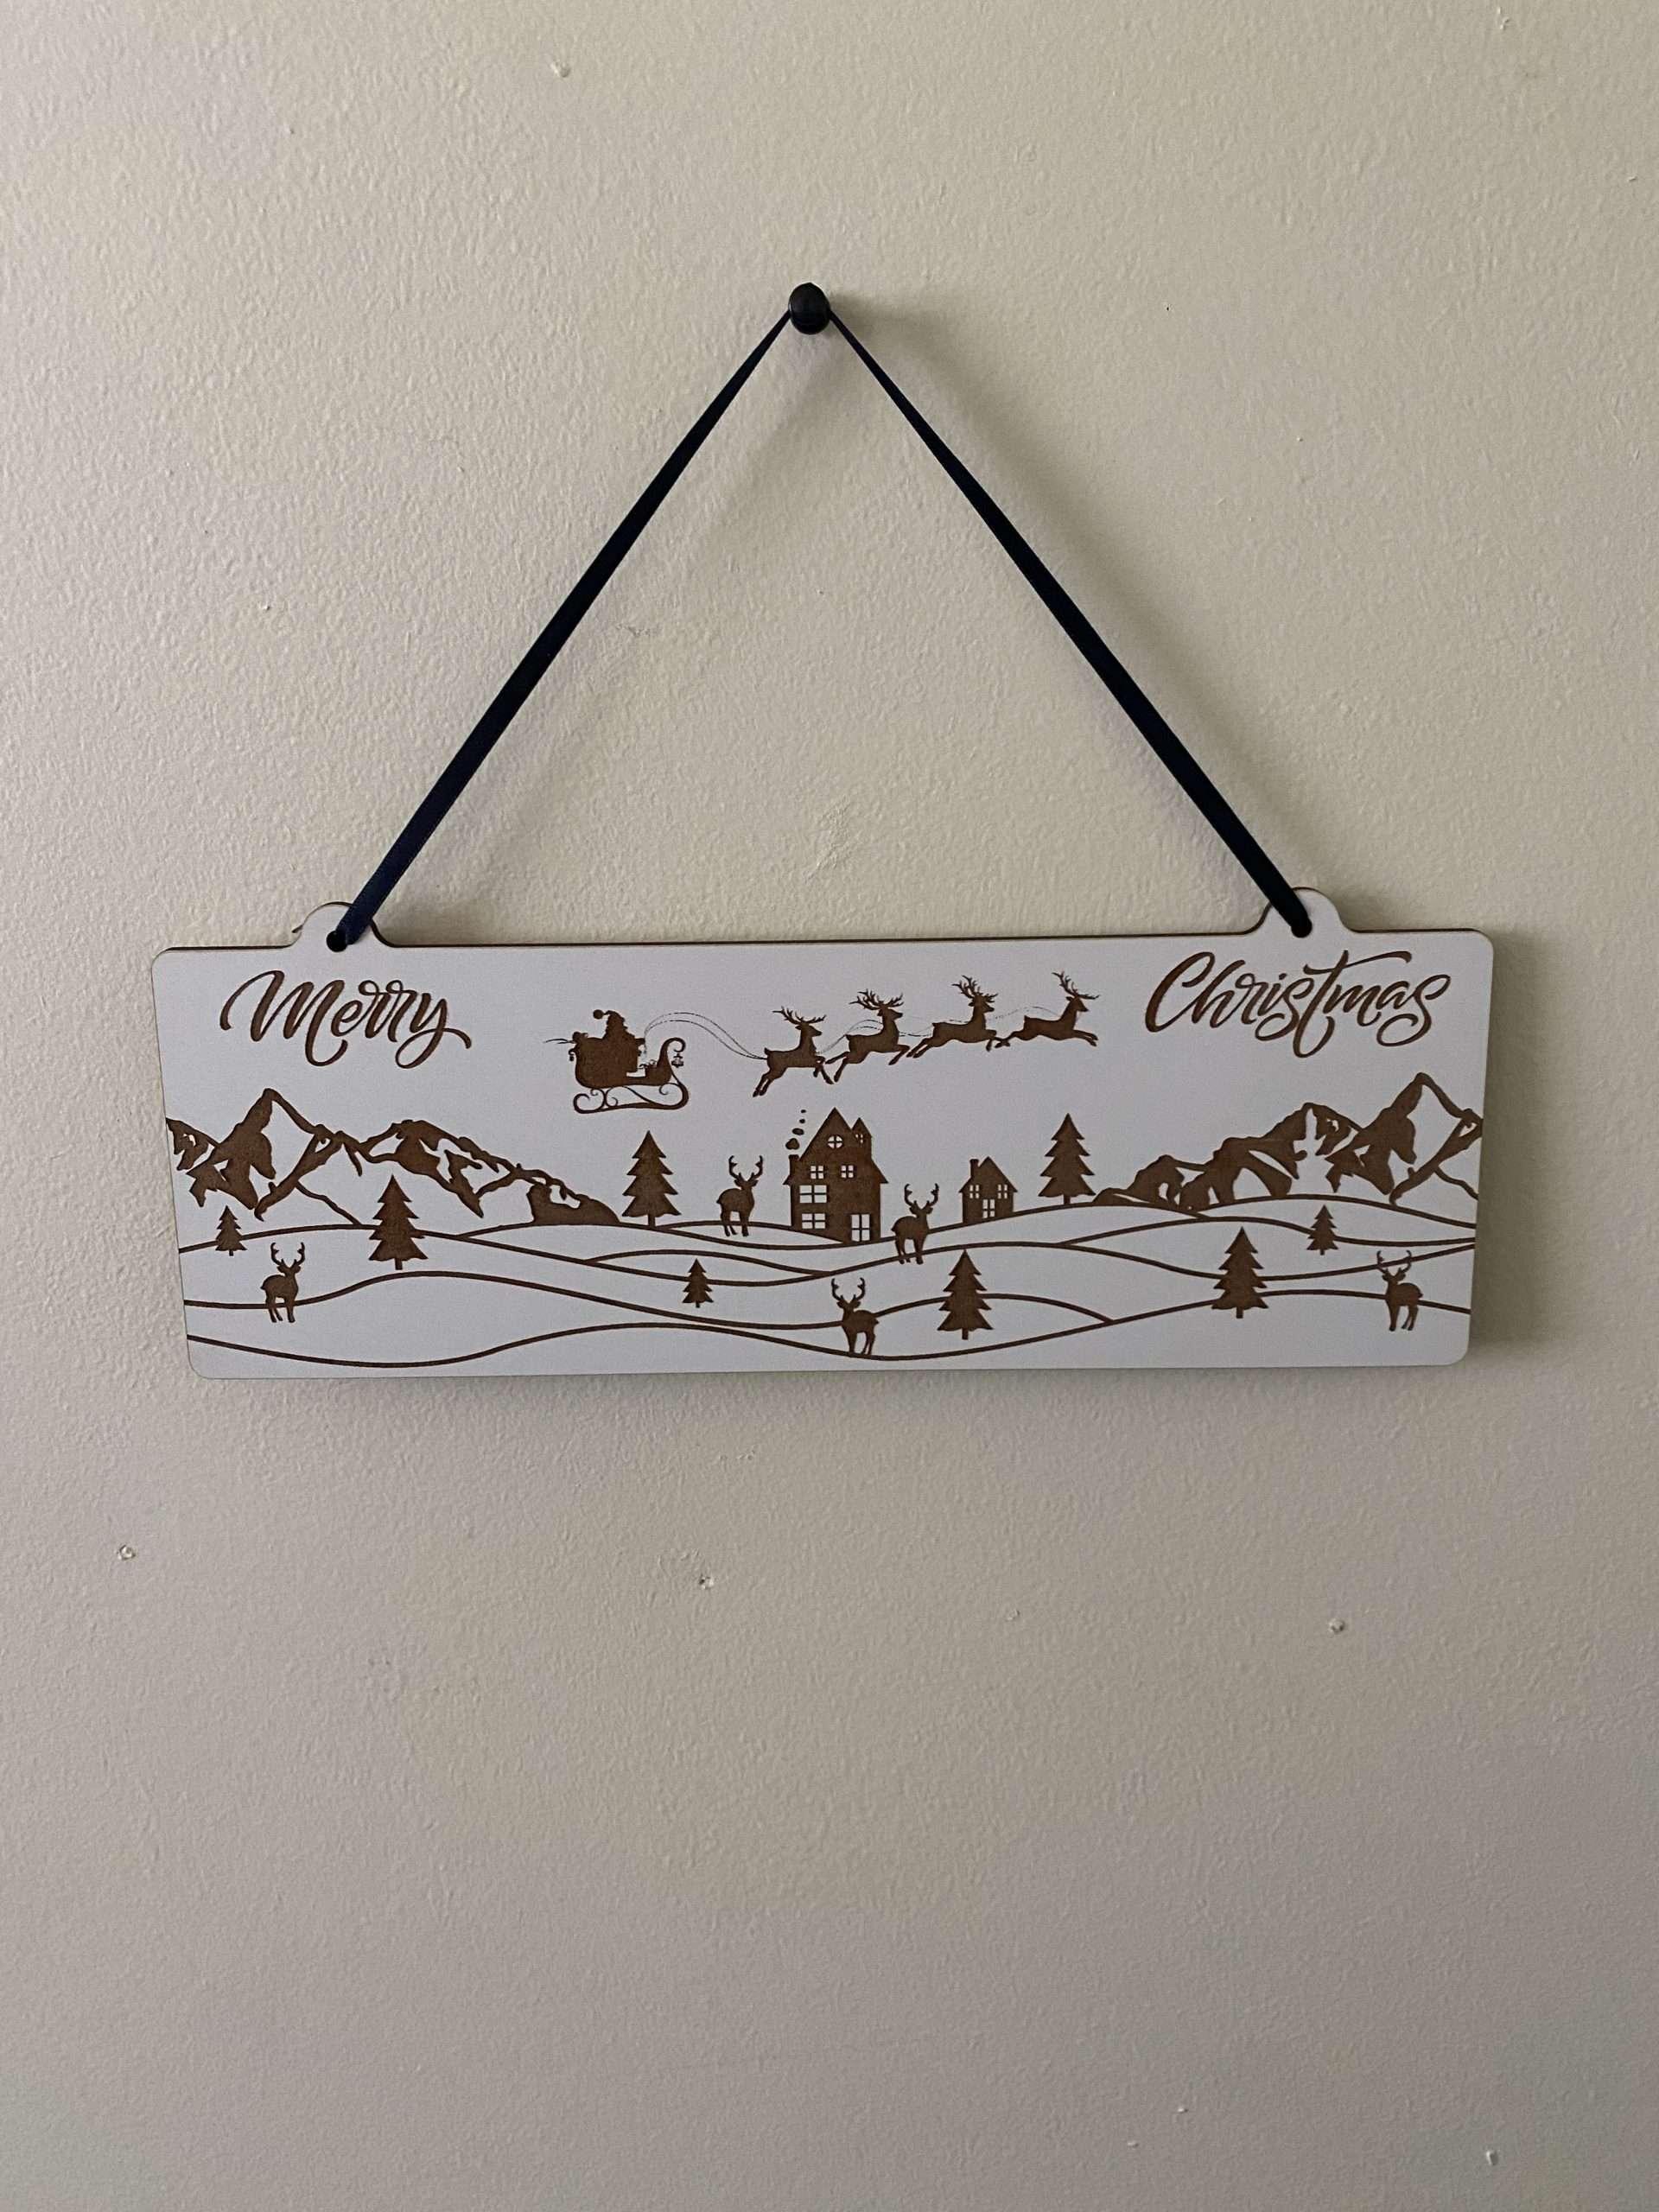 20230925 095304263 iOS scaled Decorative Christmas wall hanger depicting Christmas scene laser cut from 3mm White MDF.